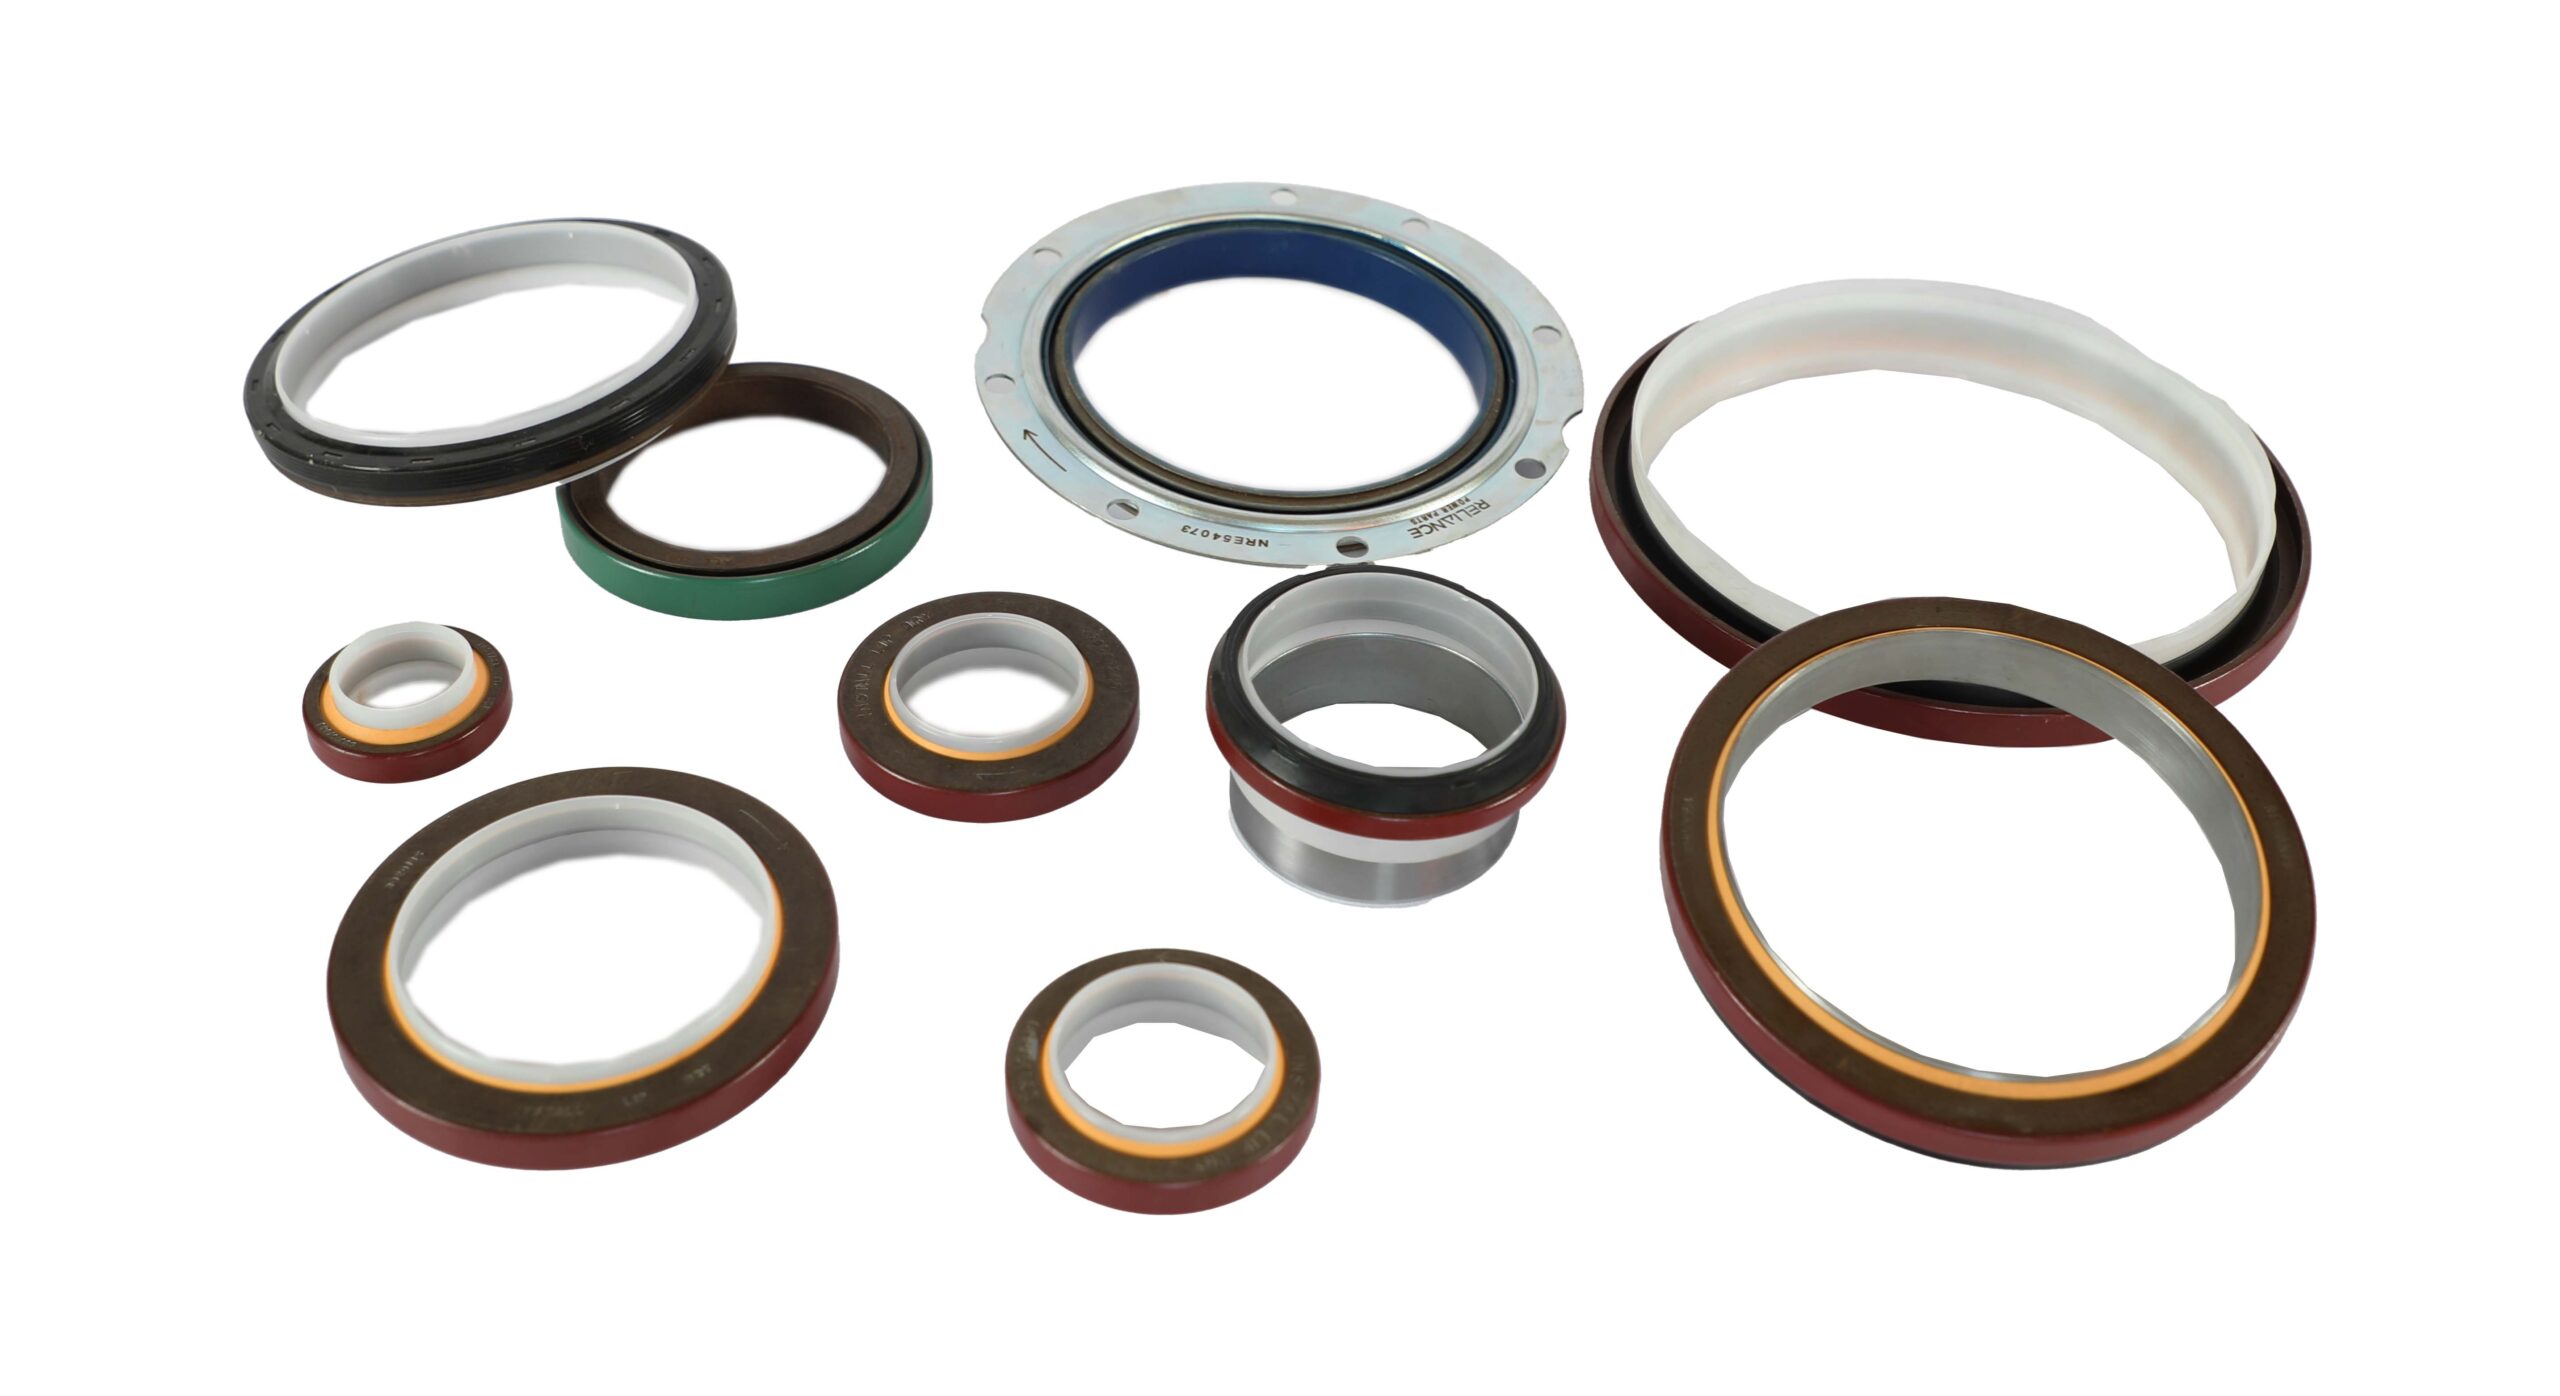 Oil seal supplier in Pune